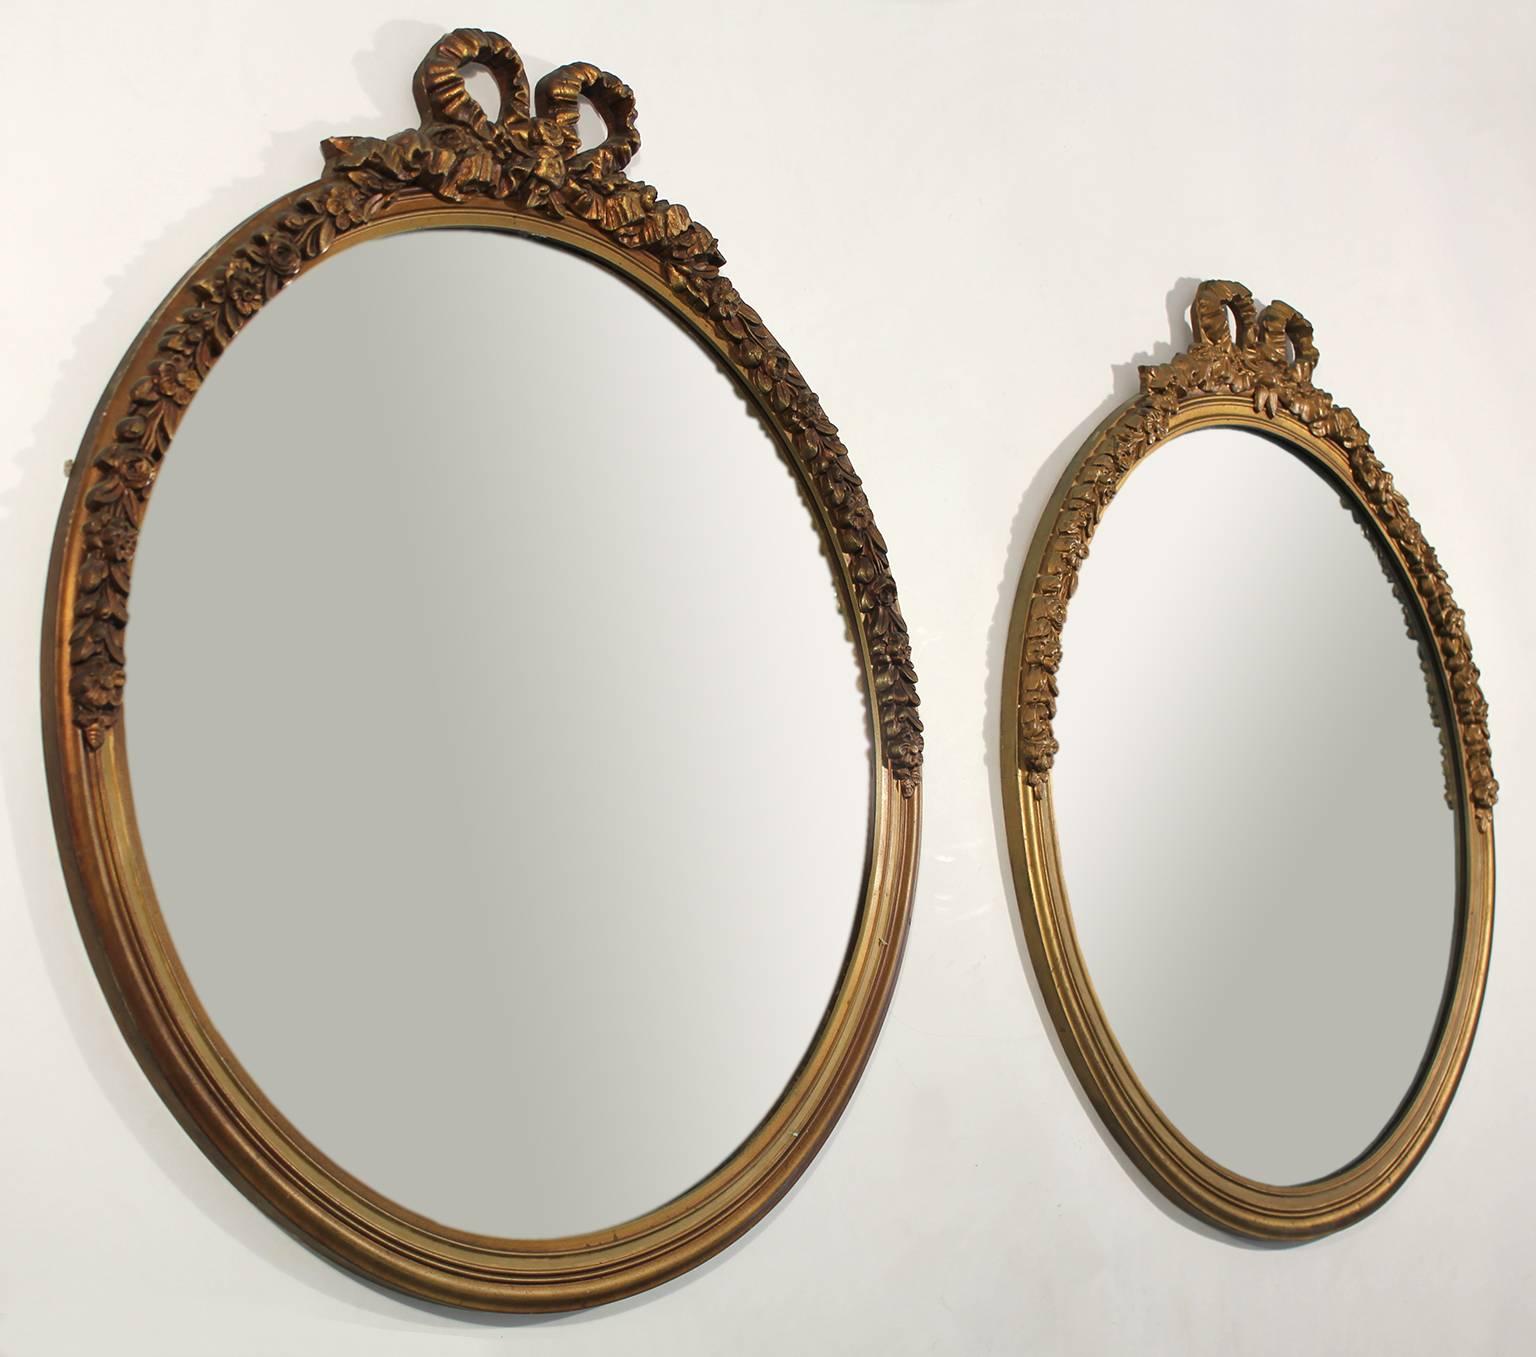 Great original antique pair of gold gilt painted carved wood mirrors. Beautiful ribbon/bow decorations done in plaster over wood. Has the original mirrors. In the style of French Baroque. These are 100% original and in very nice original condition.